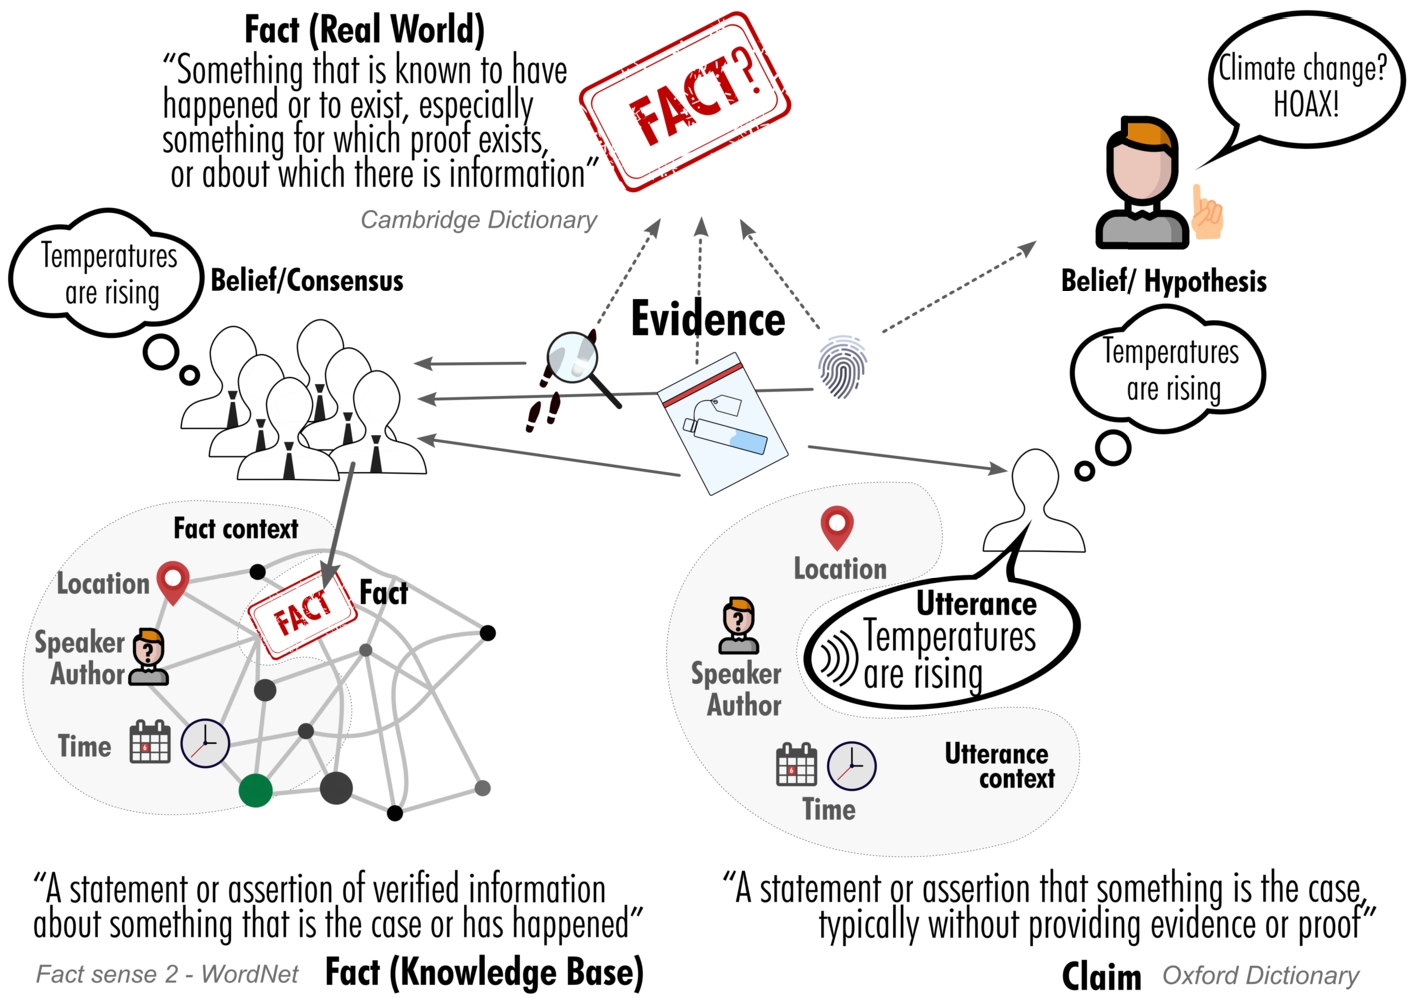 An overview of definitions and relations between facts and claims.